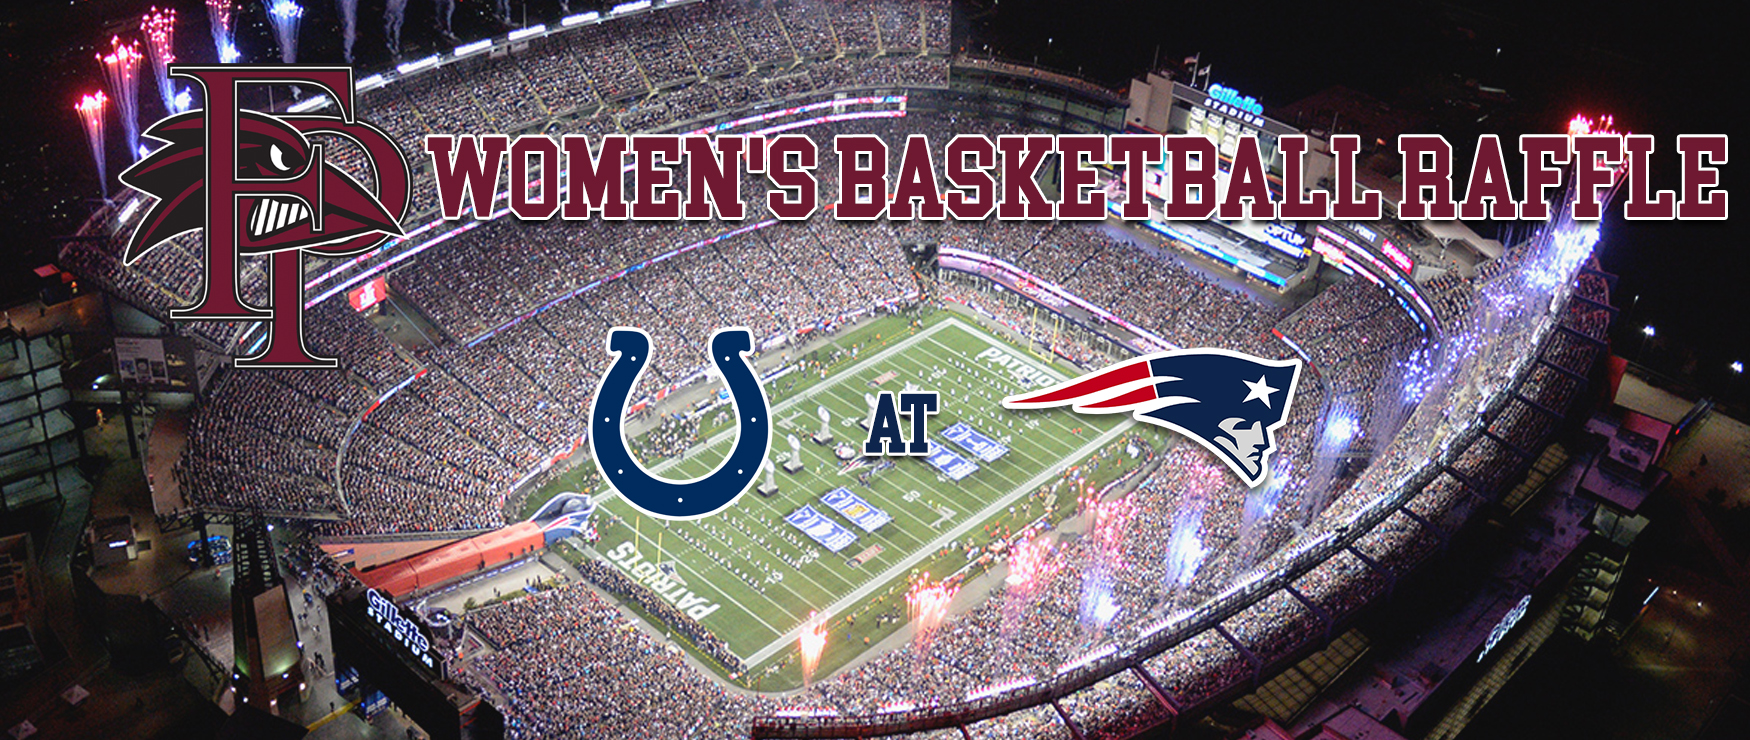 Women’s Basketball to Raffle Off Two Pairs of Patriots Tickets